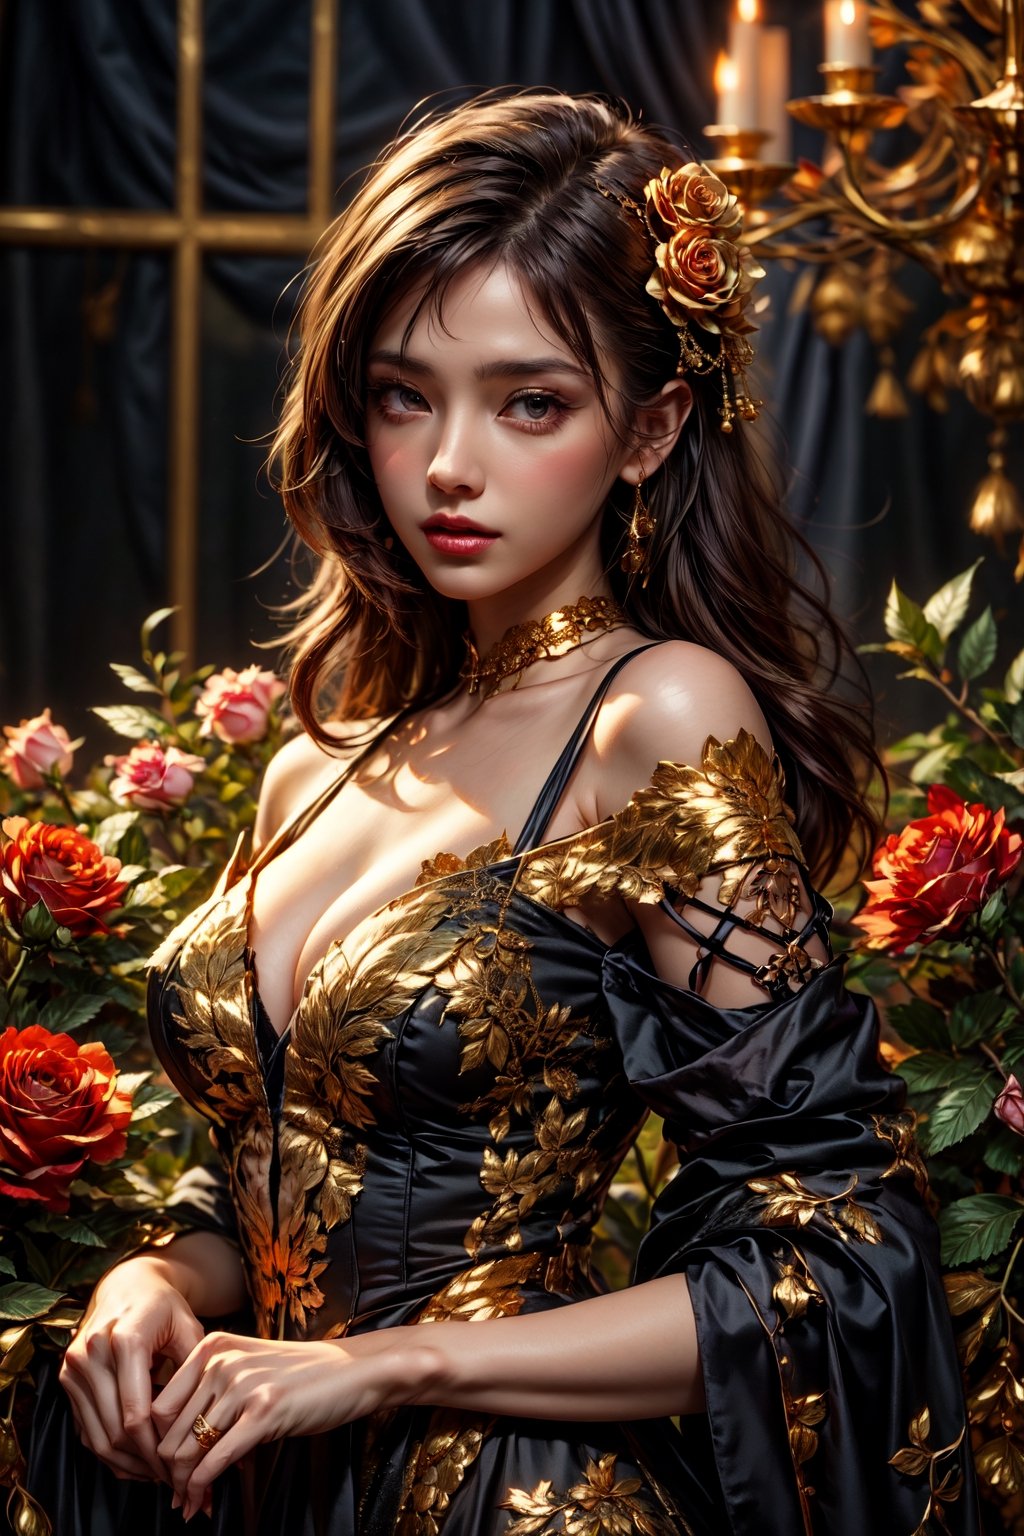 Woman with hidden gaze, nestled among realistic blooms and Gold Edged Black Roses, deep colors, intricate details, by FuturEvoLab, elegant atmosphere.